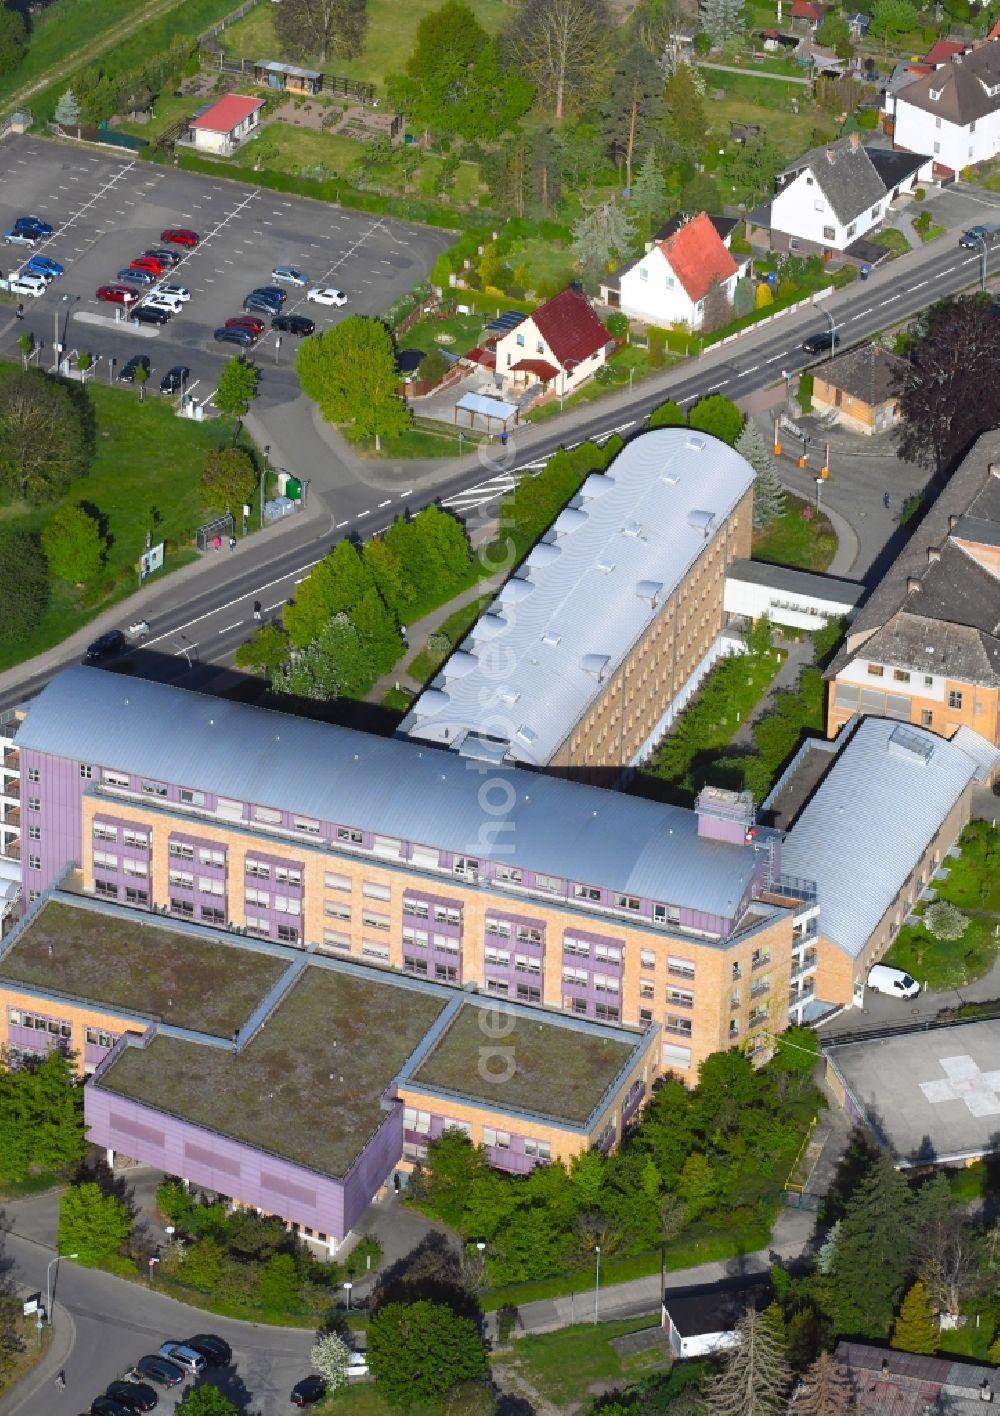 Aerial image Sondershausen - Hospital grounds of the Clinic KMG Kliniken in the district Bendeleben in Sondershausen in the state Thuringia, Germany